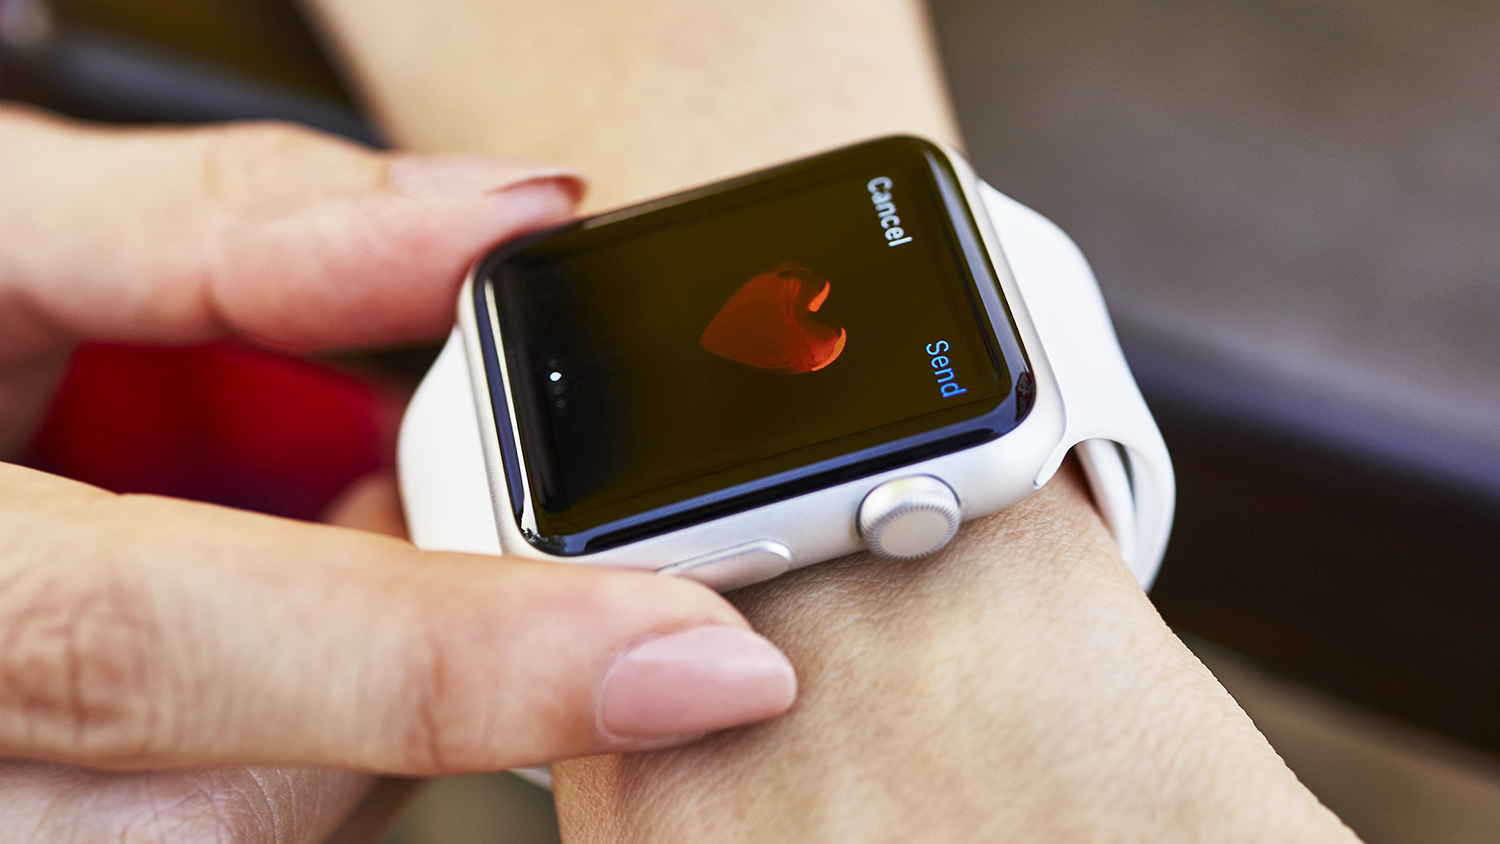 Smart Watches Hold Promise to Detect Disease and Improve Health